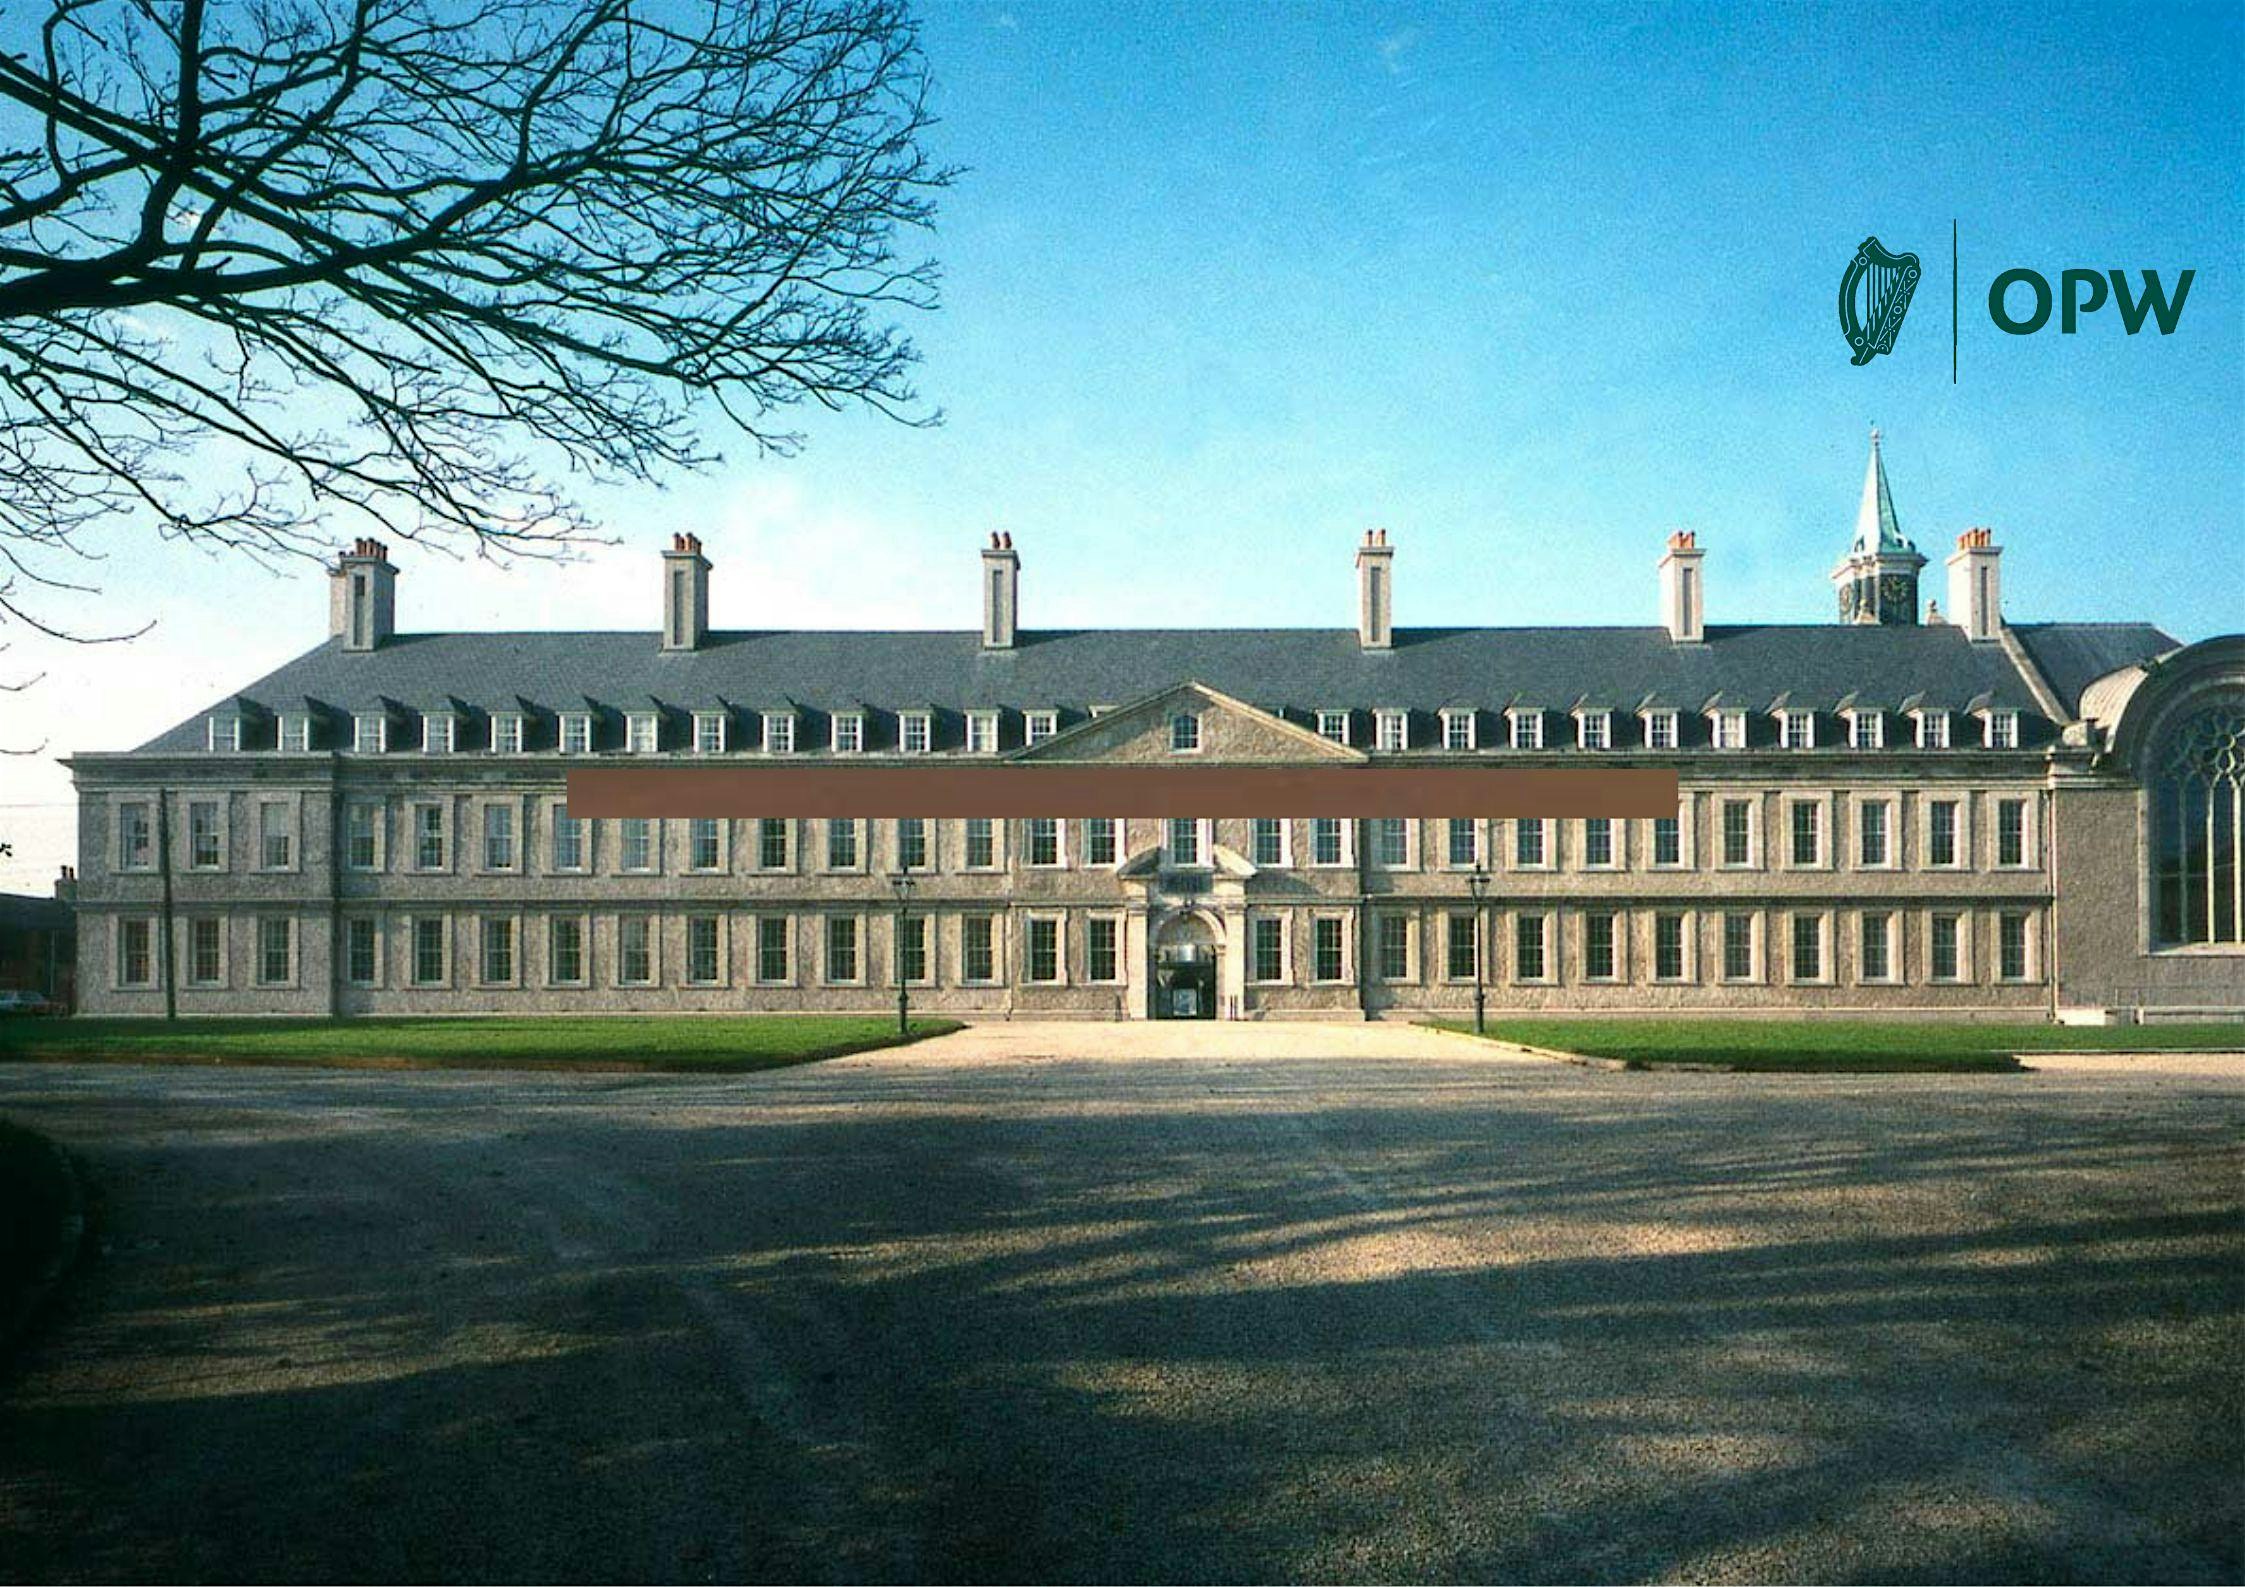 Reading for Old Soldiers: The Libraries of the Royal Hospital Kilmainham